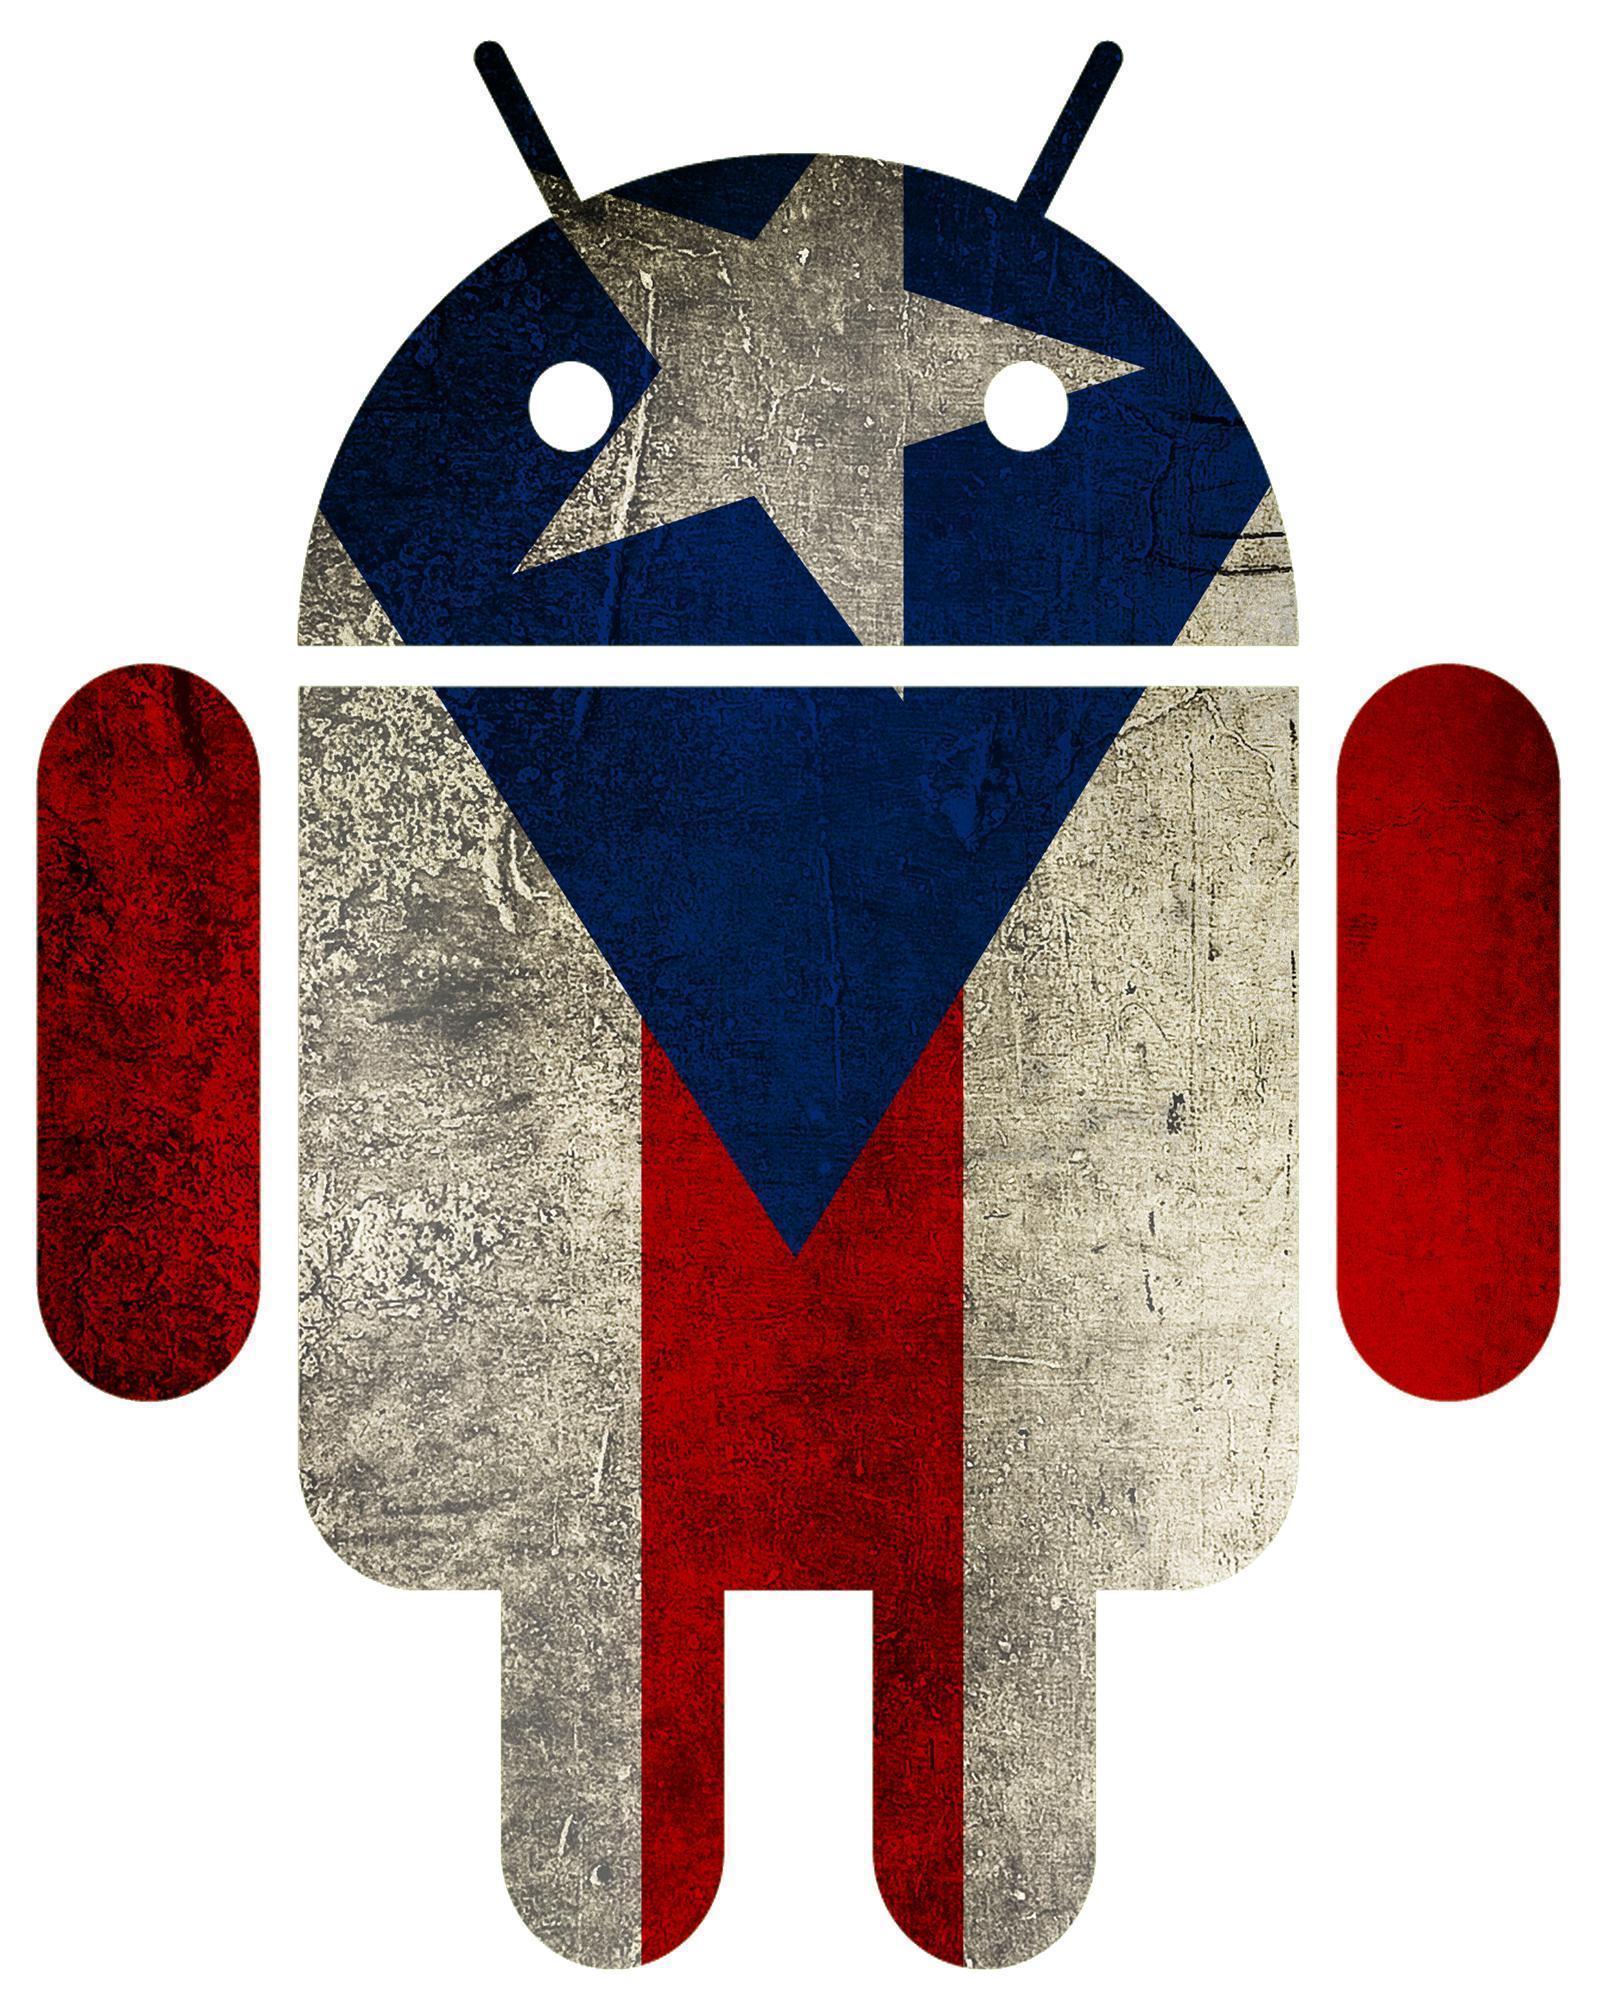 Puerto Rican Android by wildstang83